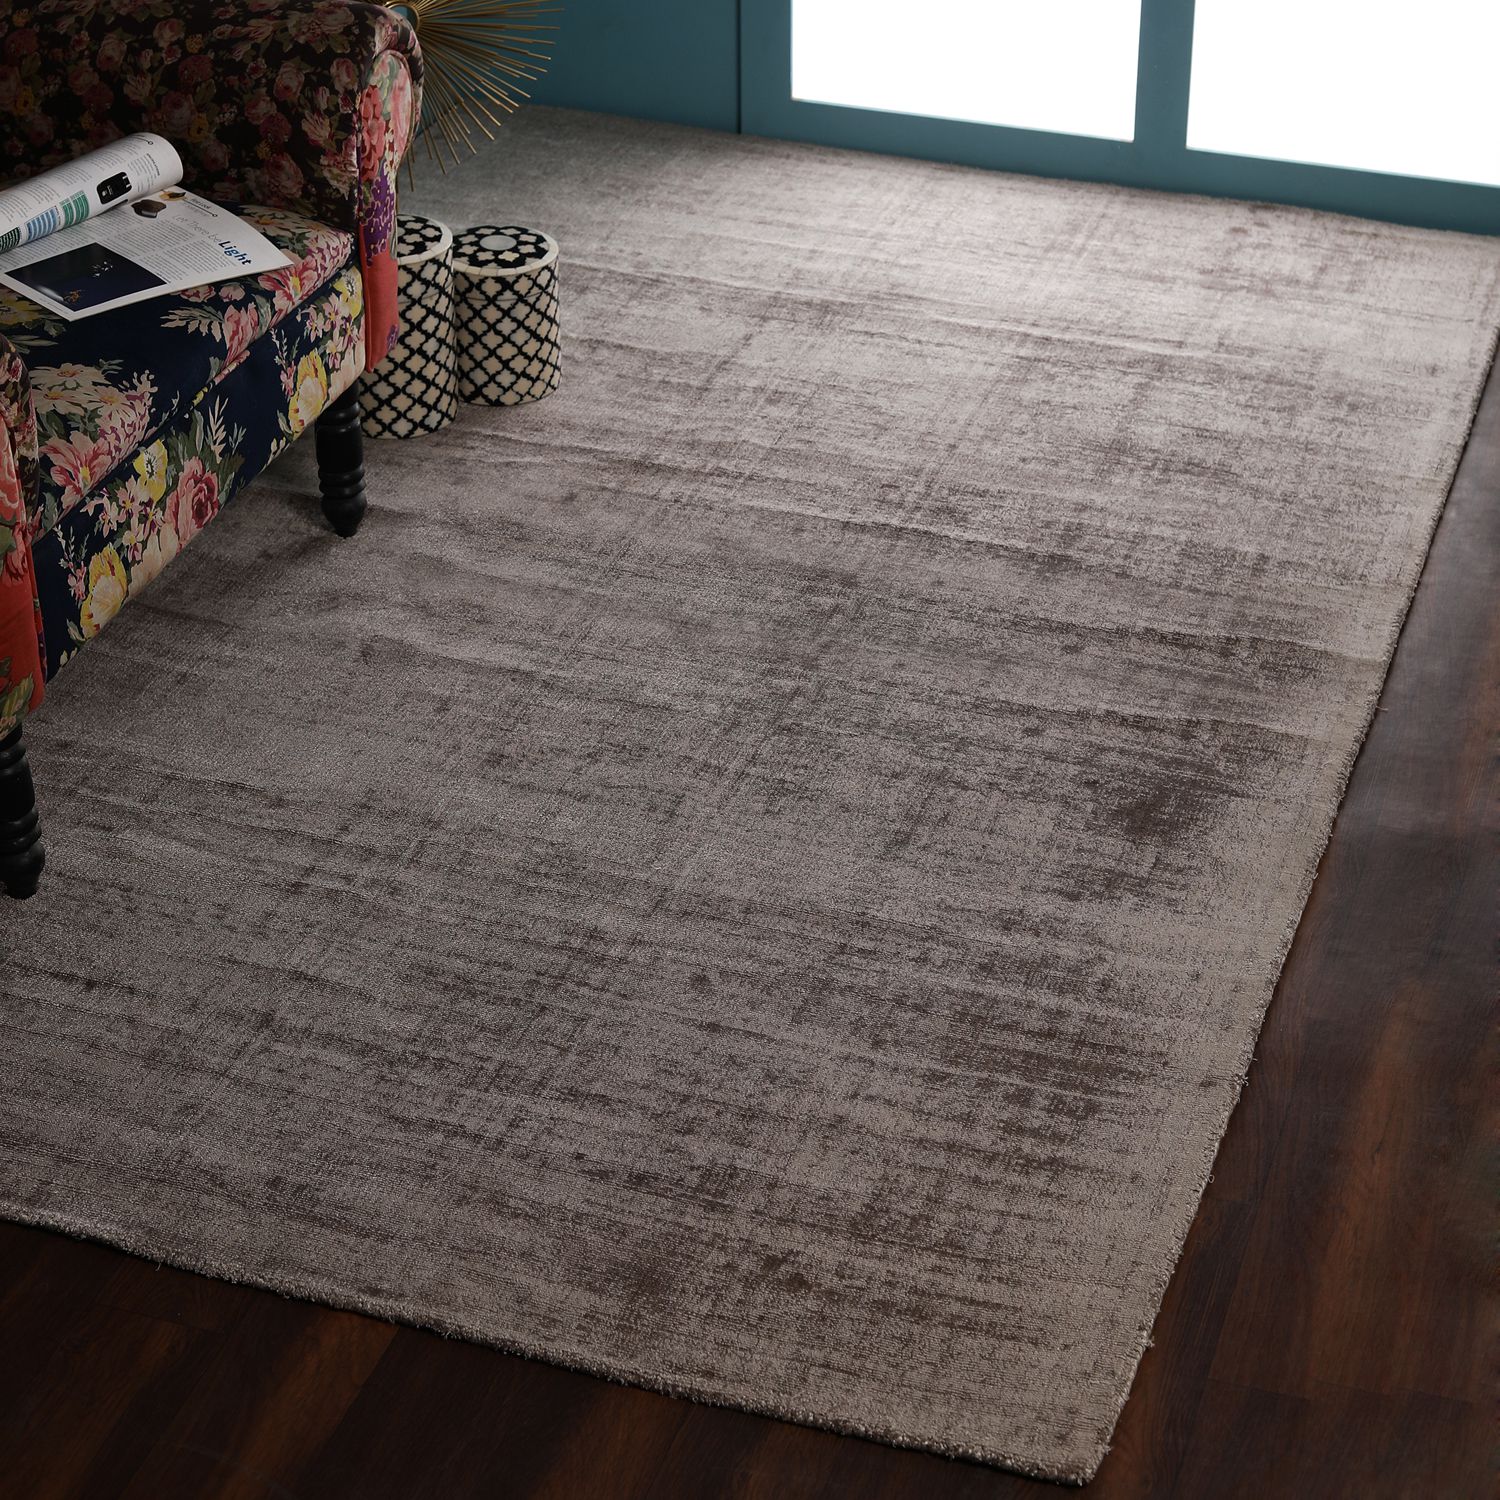     			PEQURA Beige Others Carpet Abstract 5x8 Ft